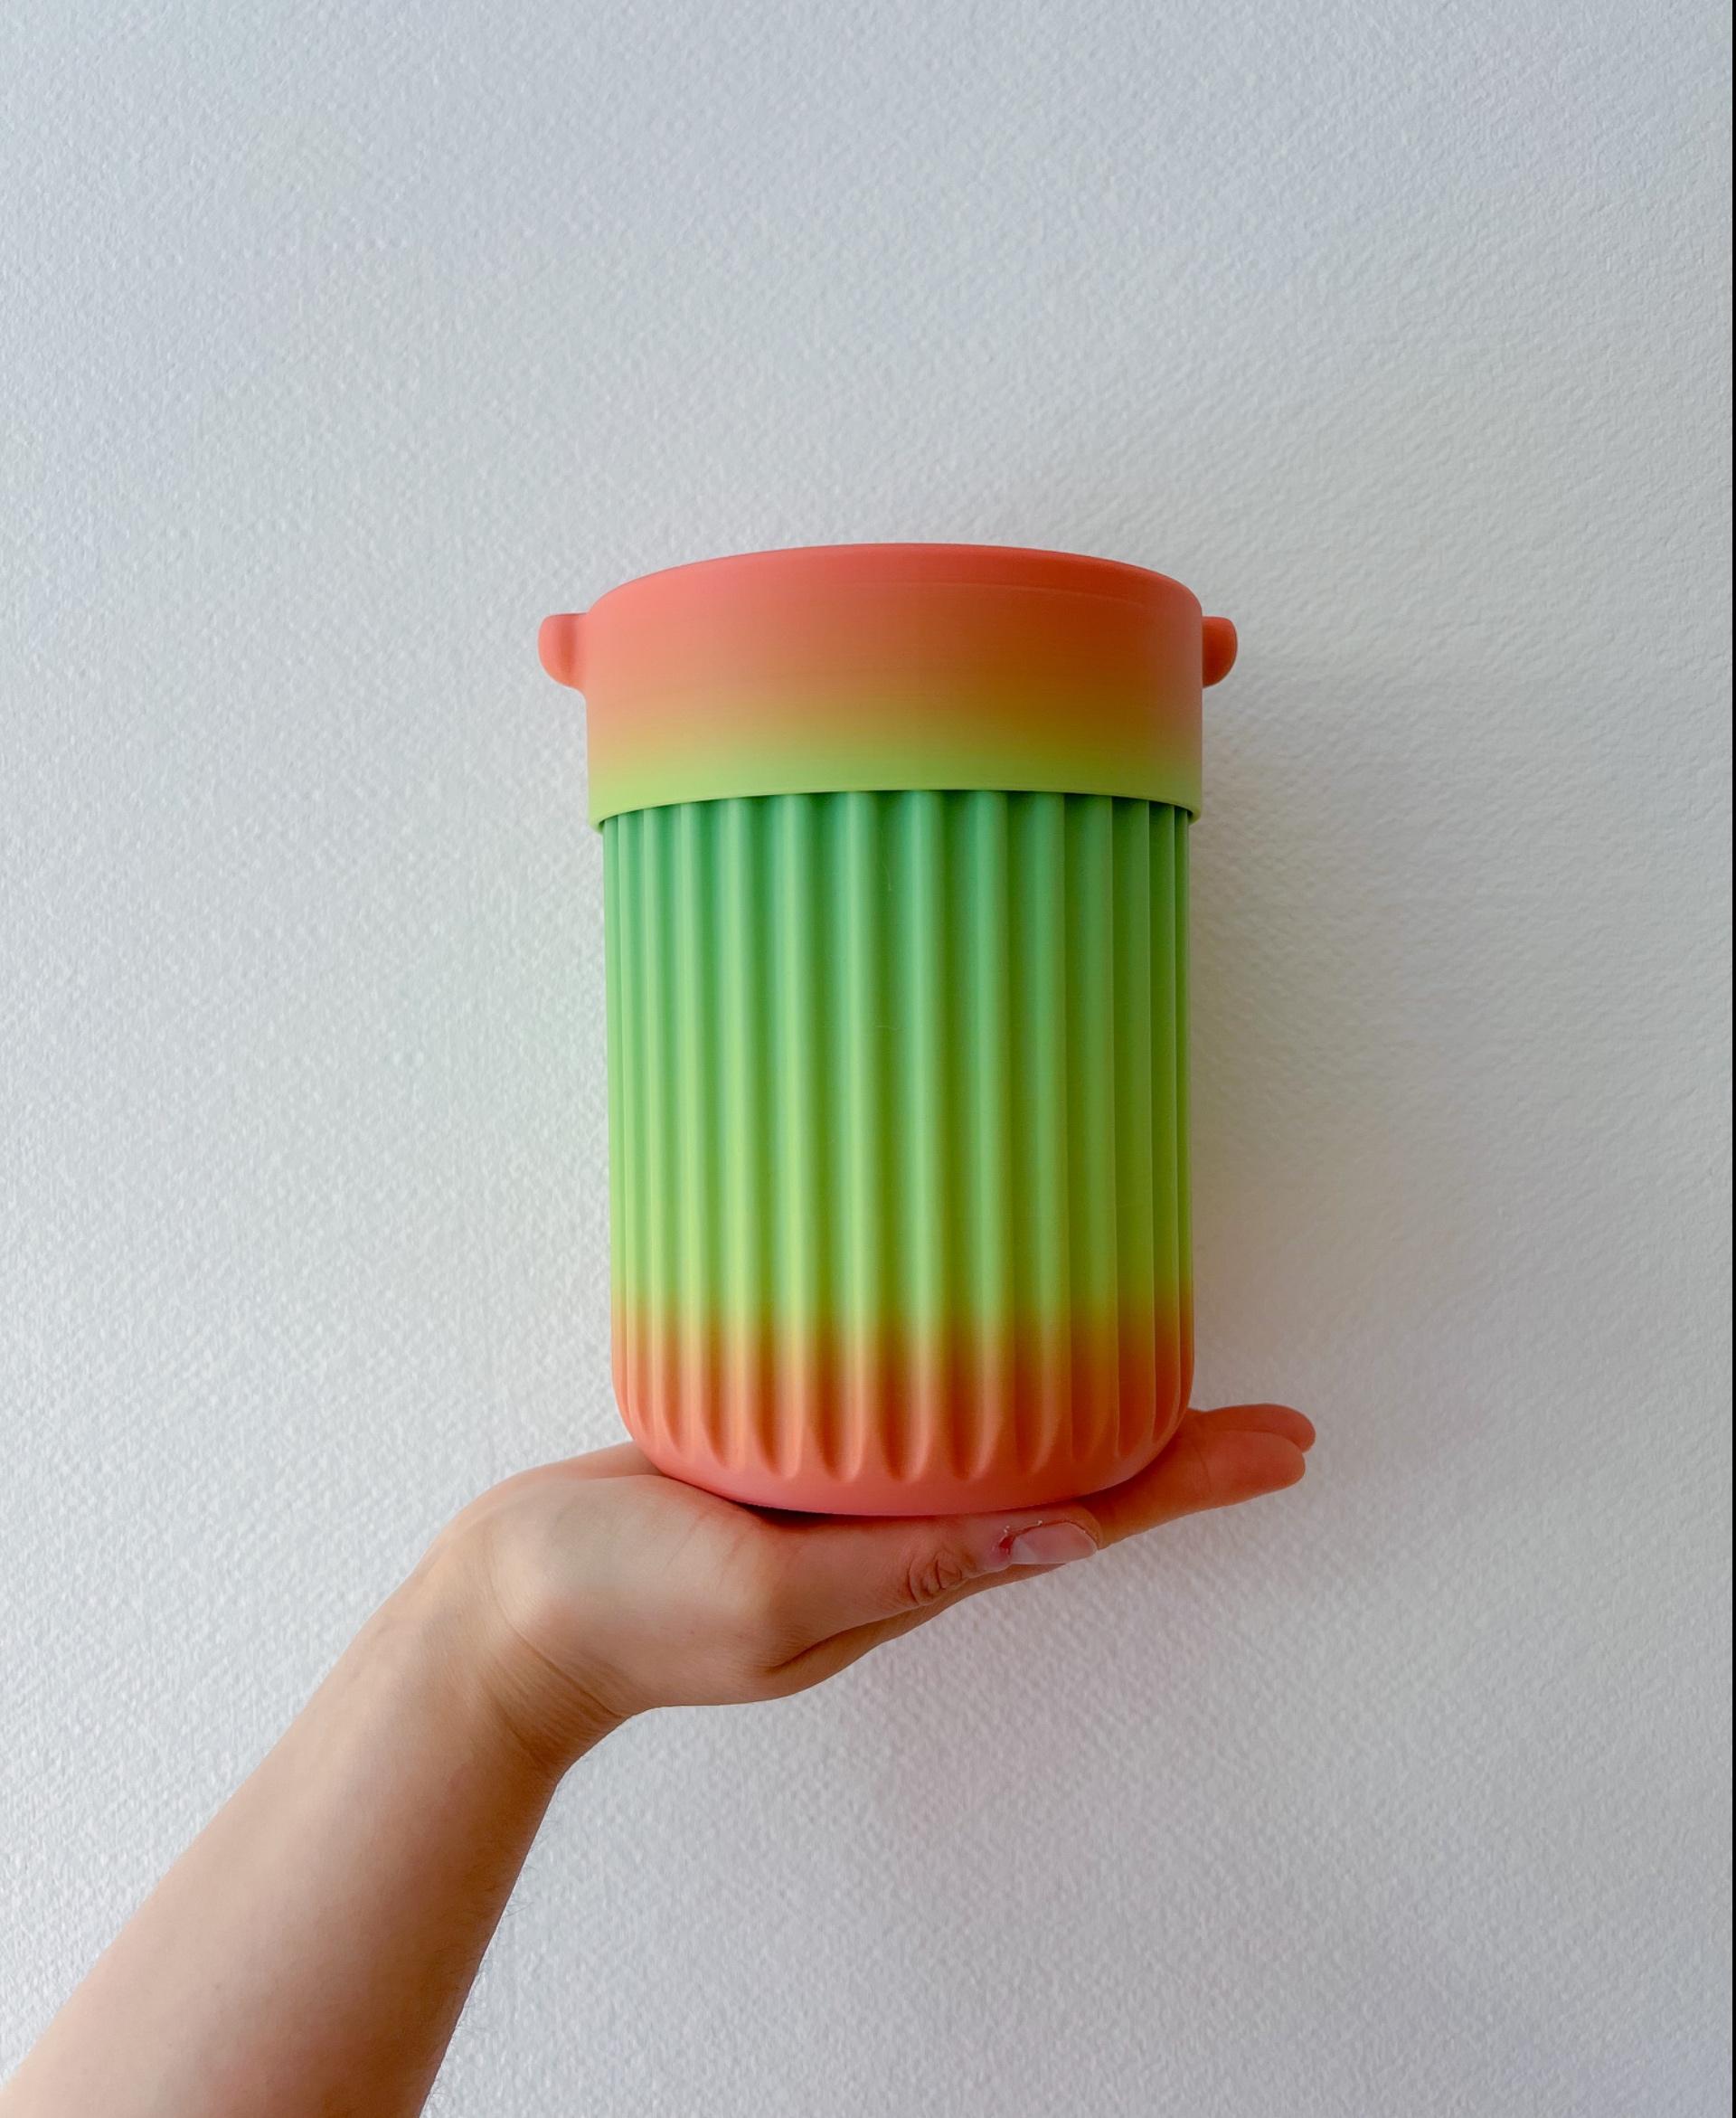 Trash can with swing lid - Small version of this cute trash can.
Isanmate rainbow filament. - 3d model